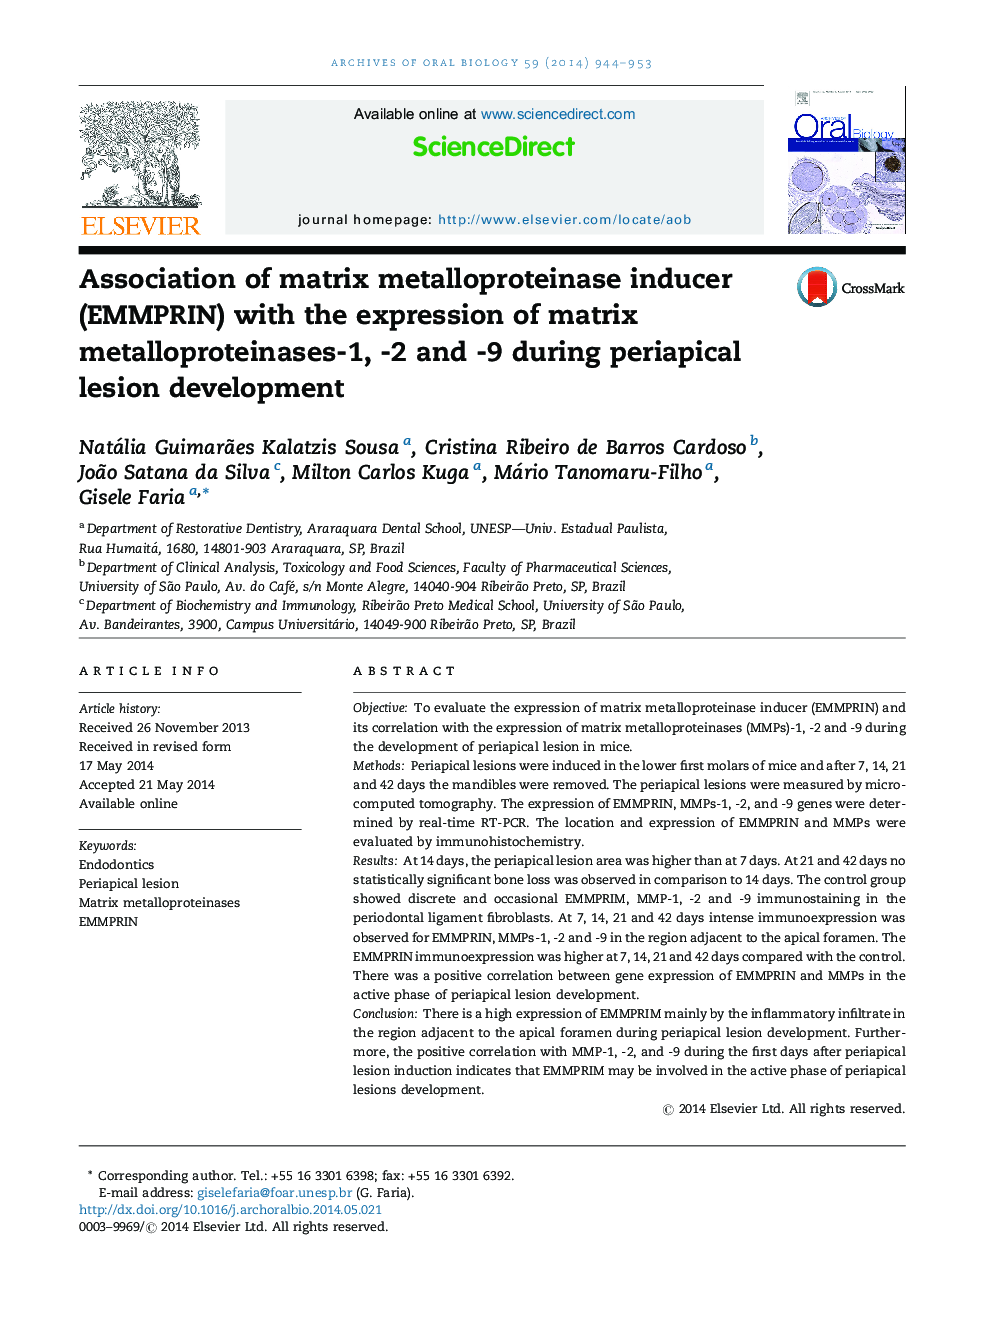 Association of matrix metalloproteinase inducer (EMMPRIN) with the expression of matrix metalloproteinases-1, -2 and -9 during periapical lesion development